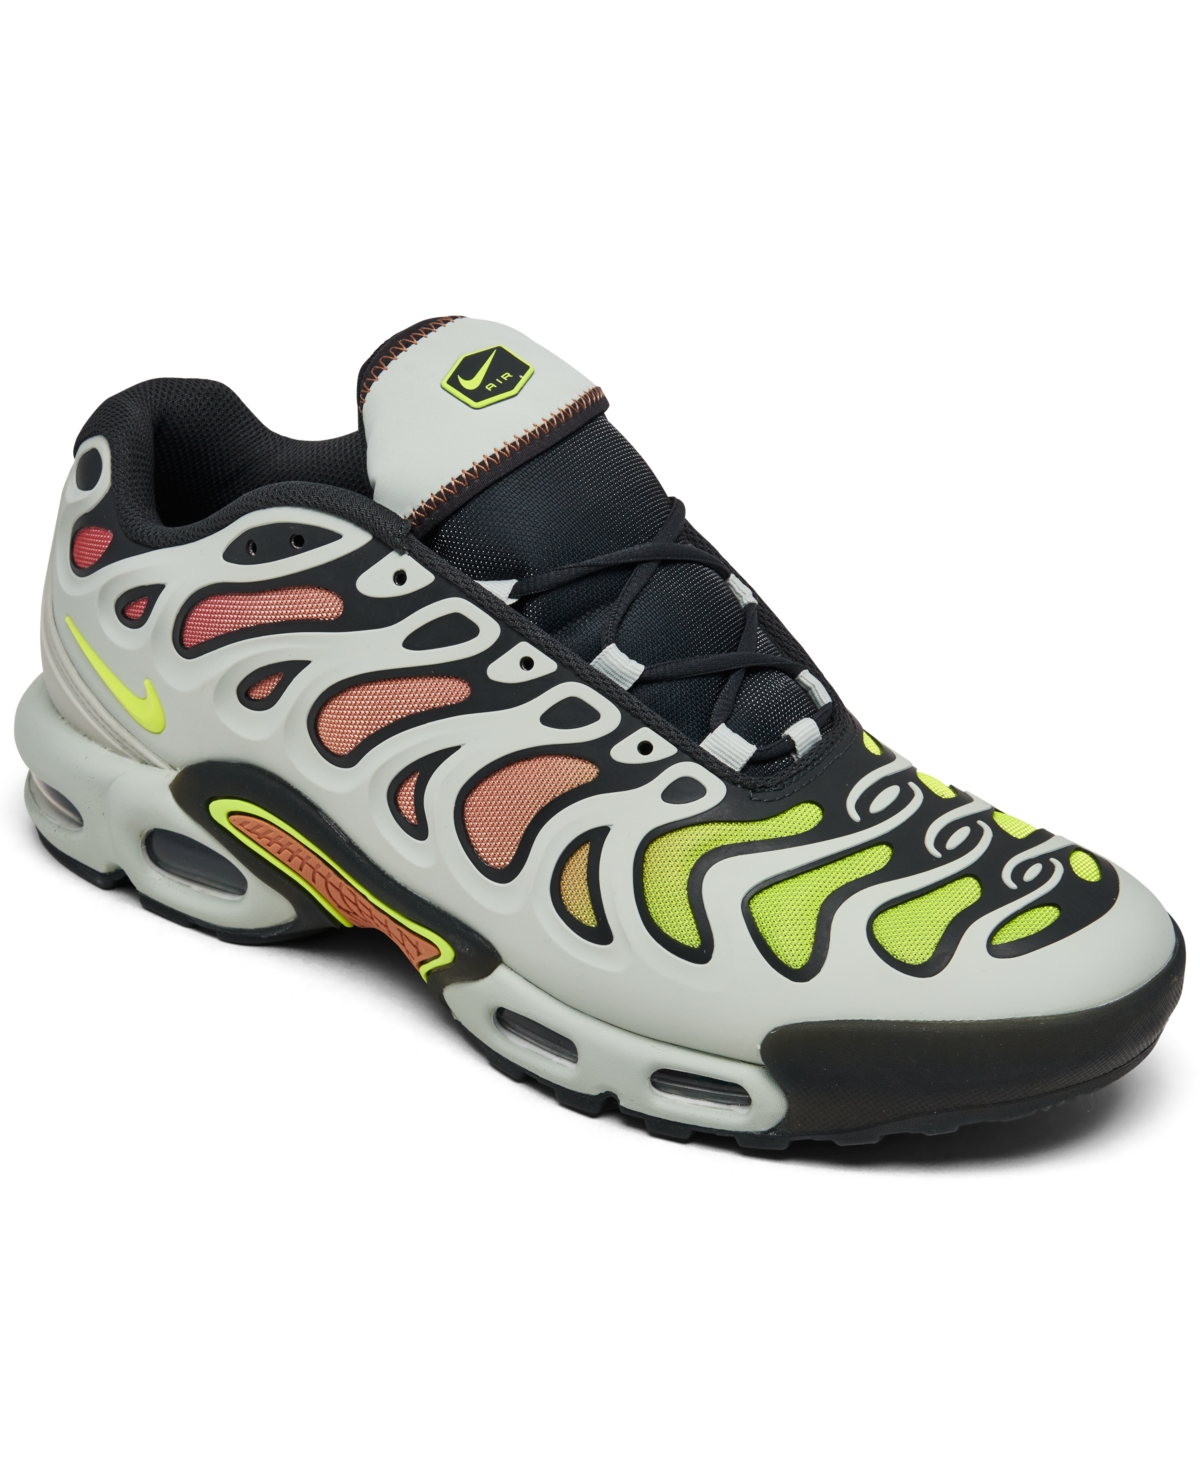 Men's Air Max Plus Drift Casual Sneakers from Finish Line - Light Silver/Volt/Smoke Green